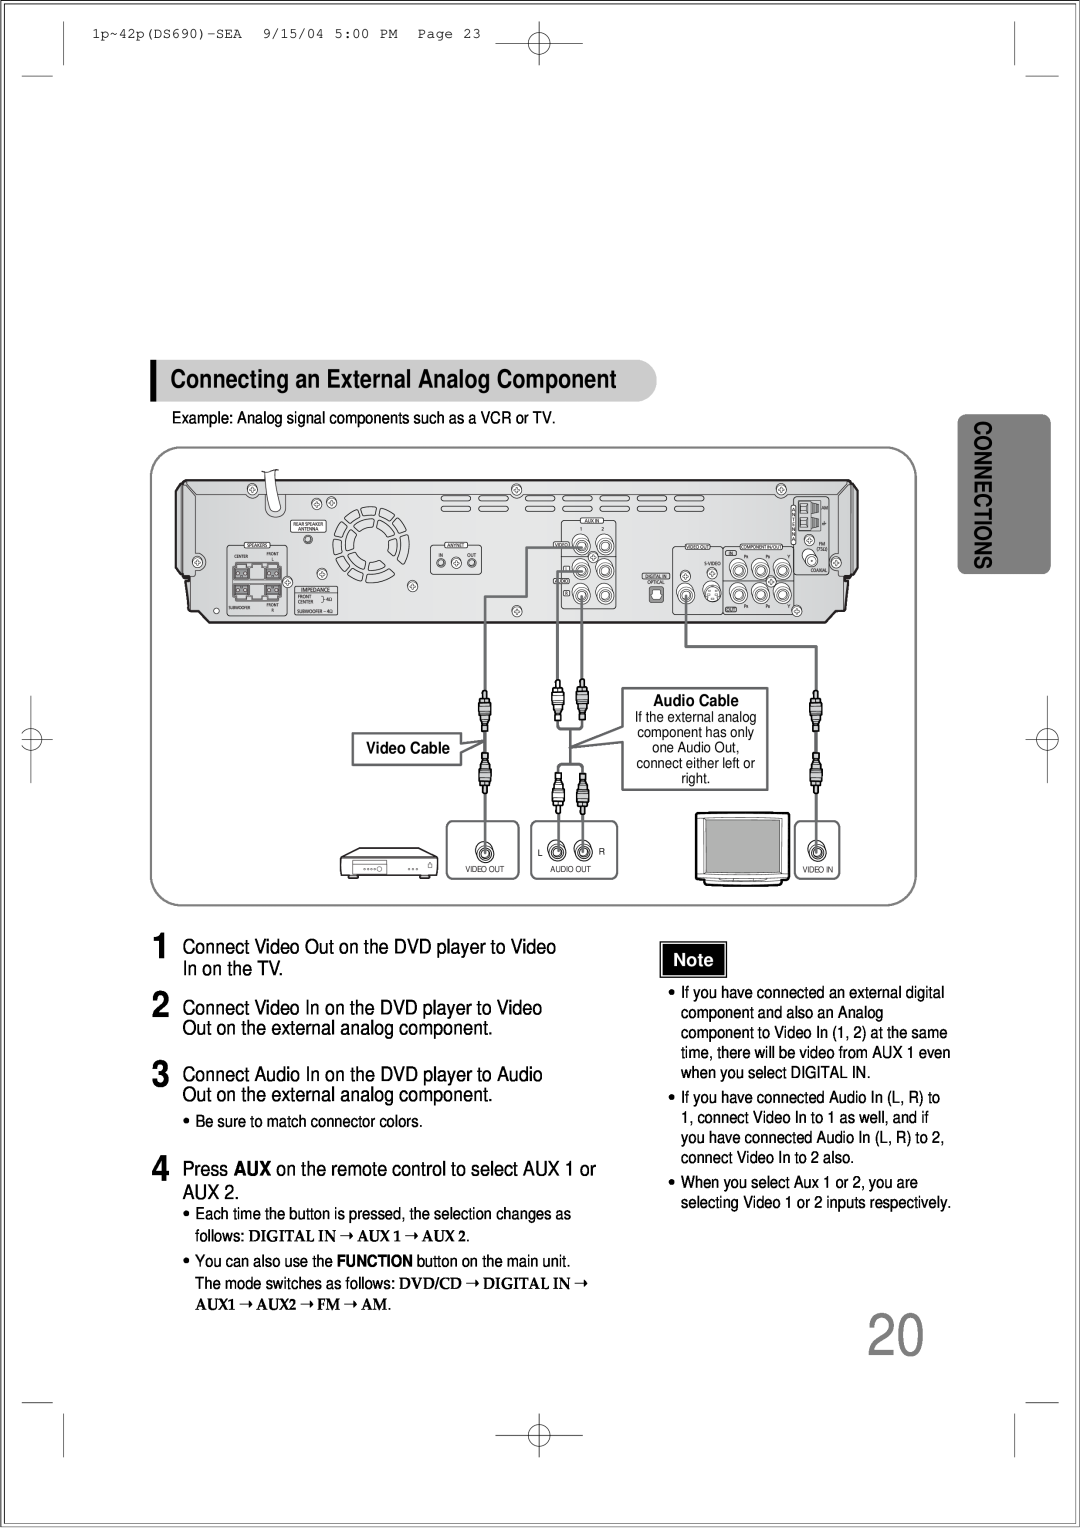 Samsung HT-DS690 instruction manual Connecting an External Analog Component, Connections, Video Cable 